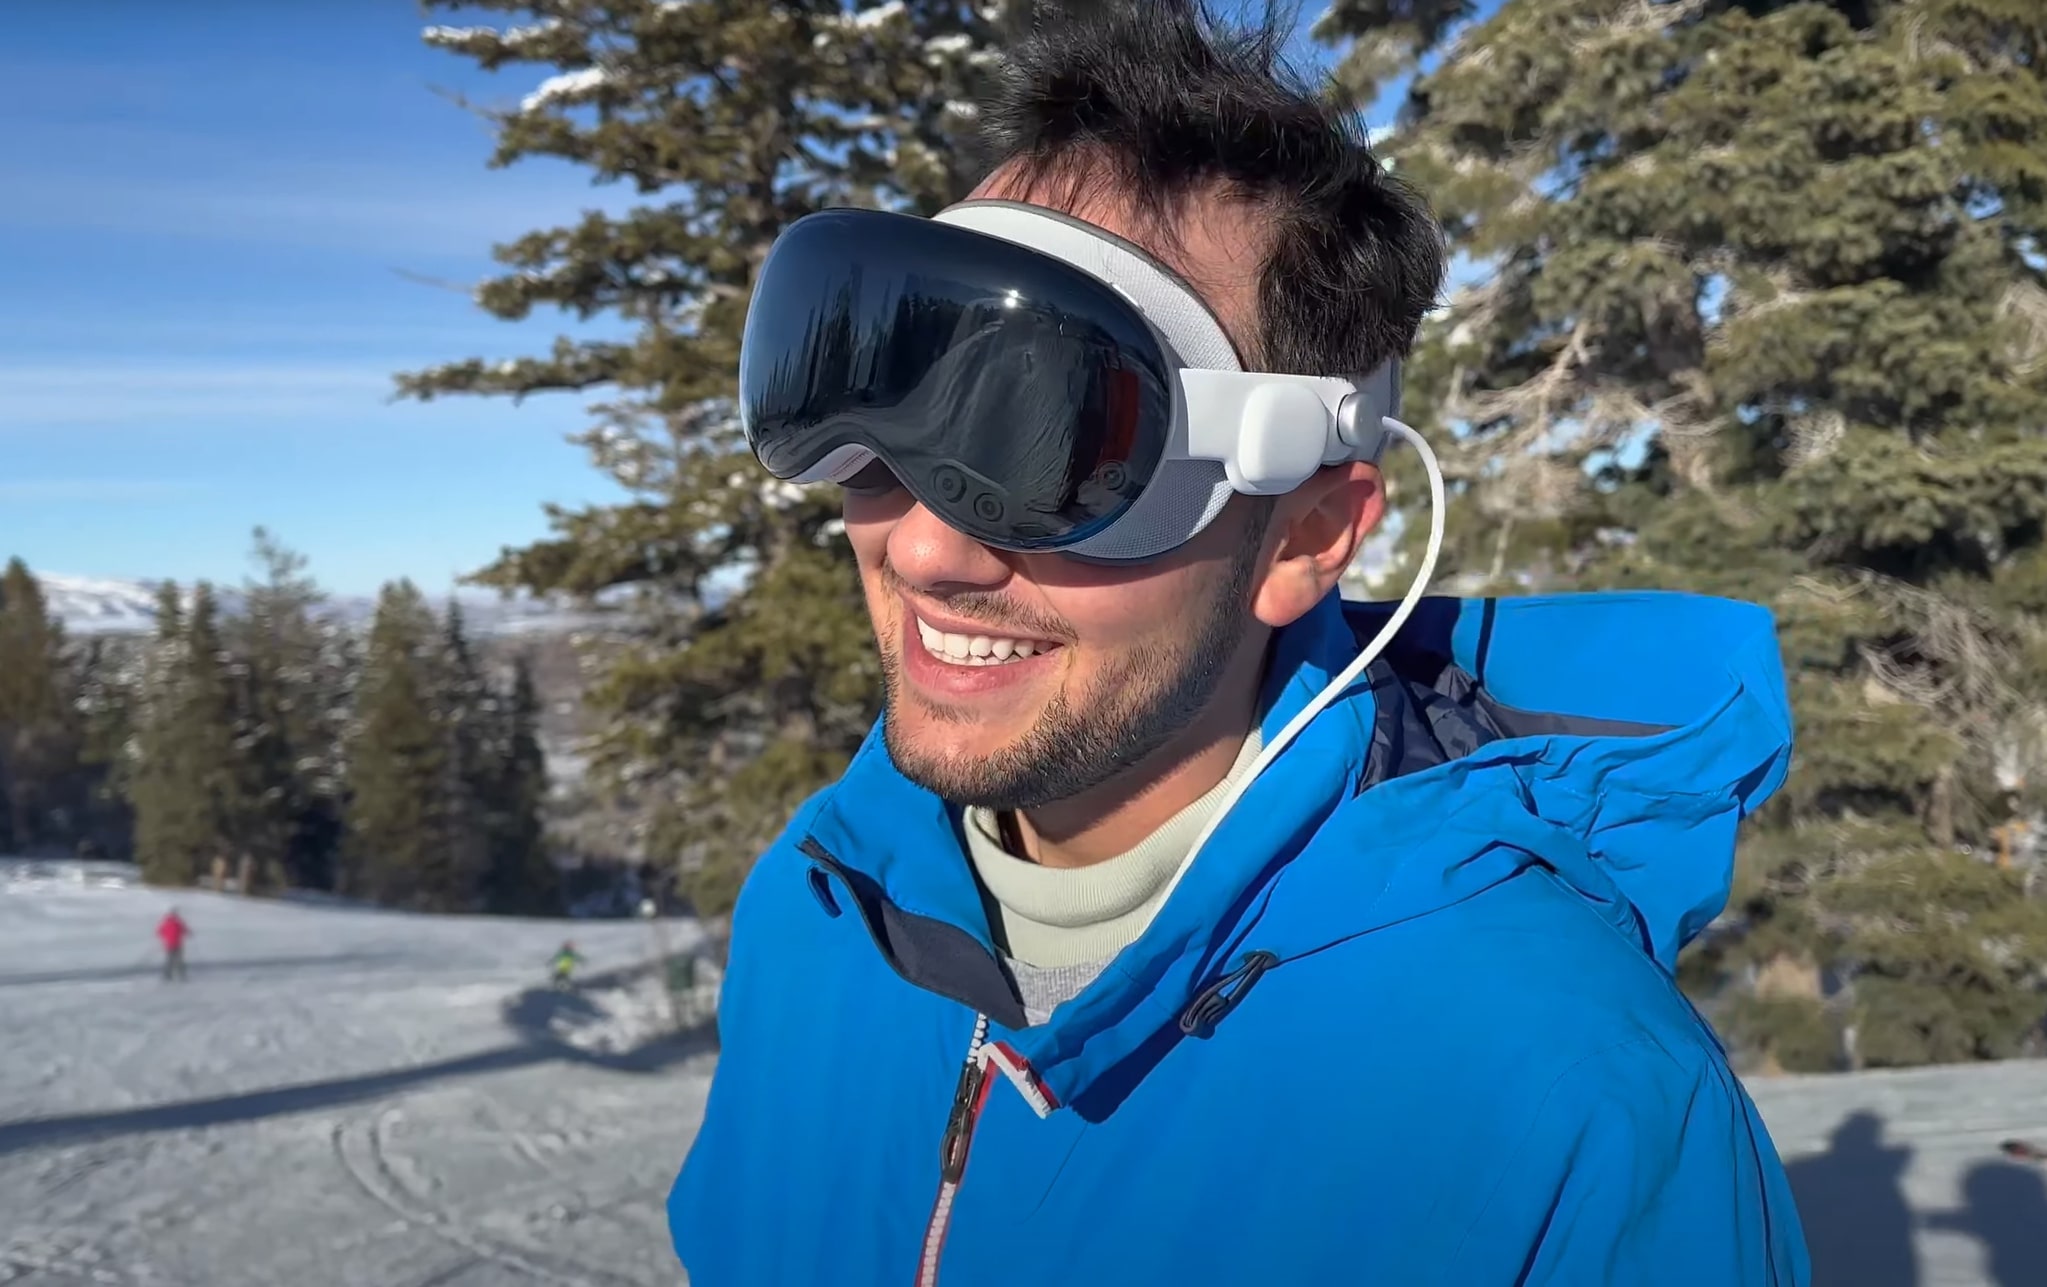 WATCH: Skiers Try Out Apple Vision Pro As Goggles